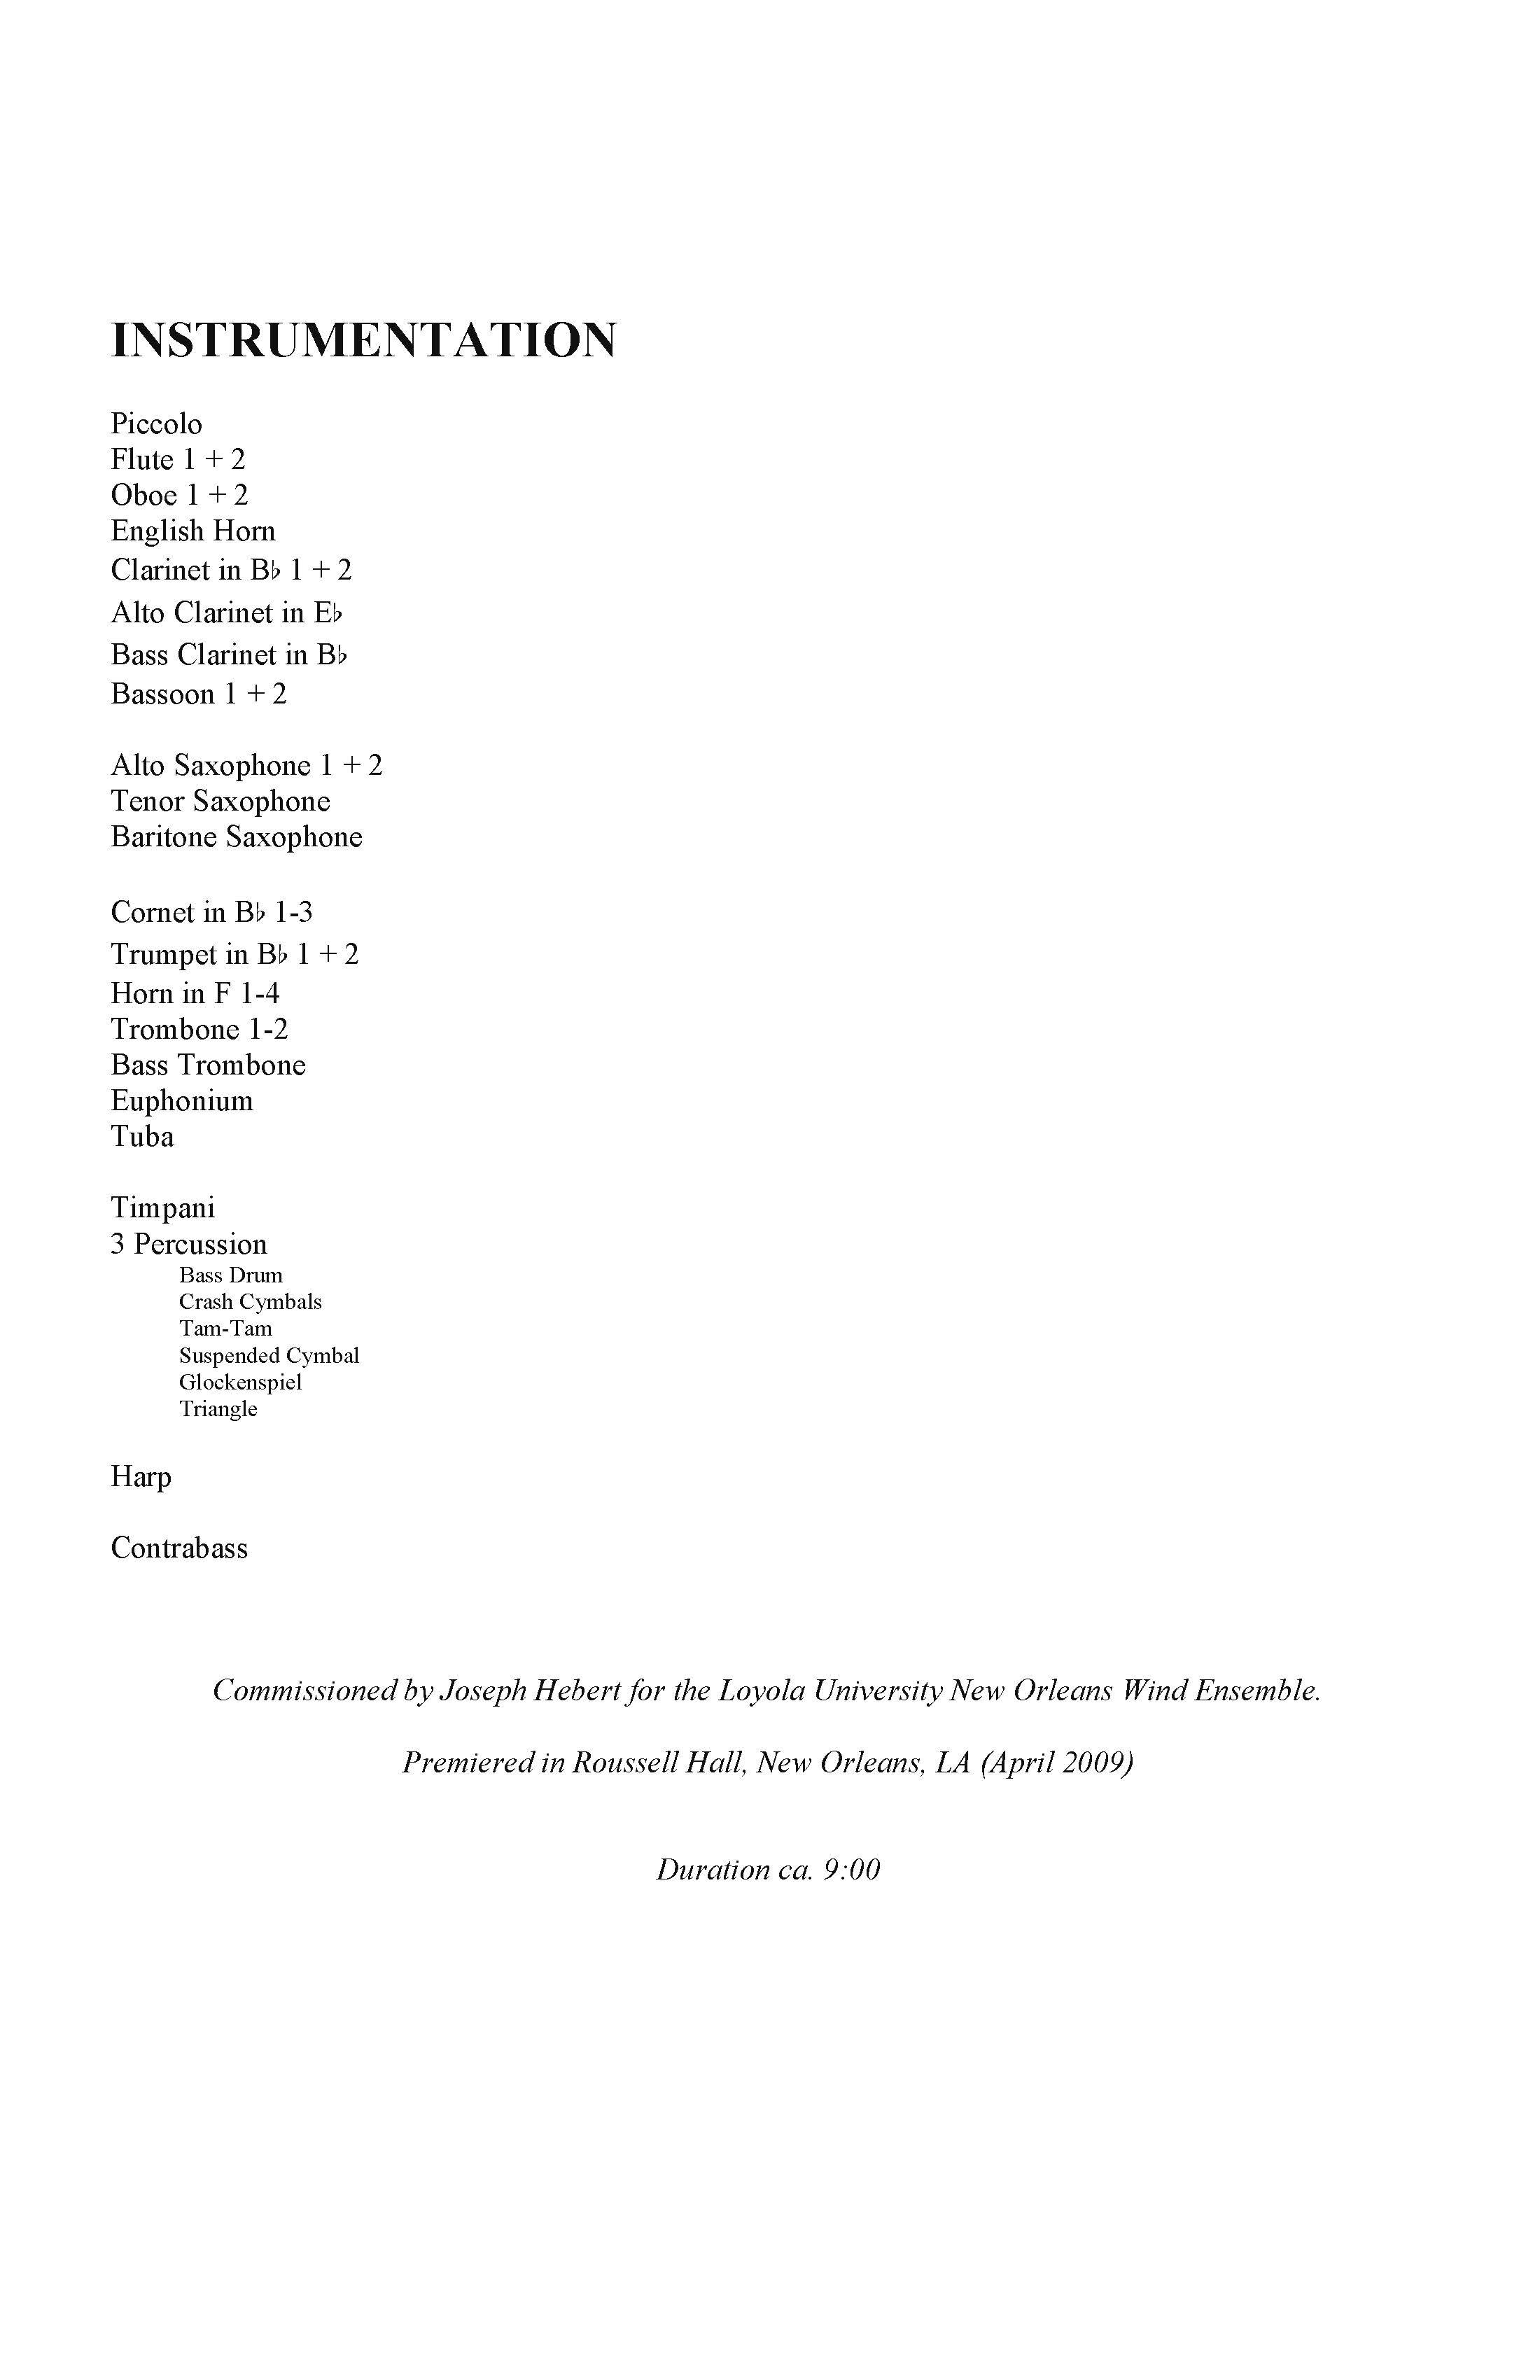 Psyche - Complete Score_Page_05.jpg